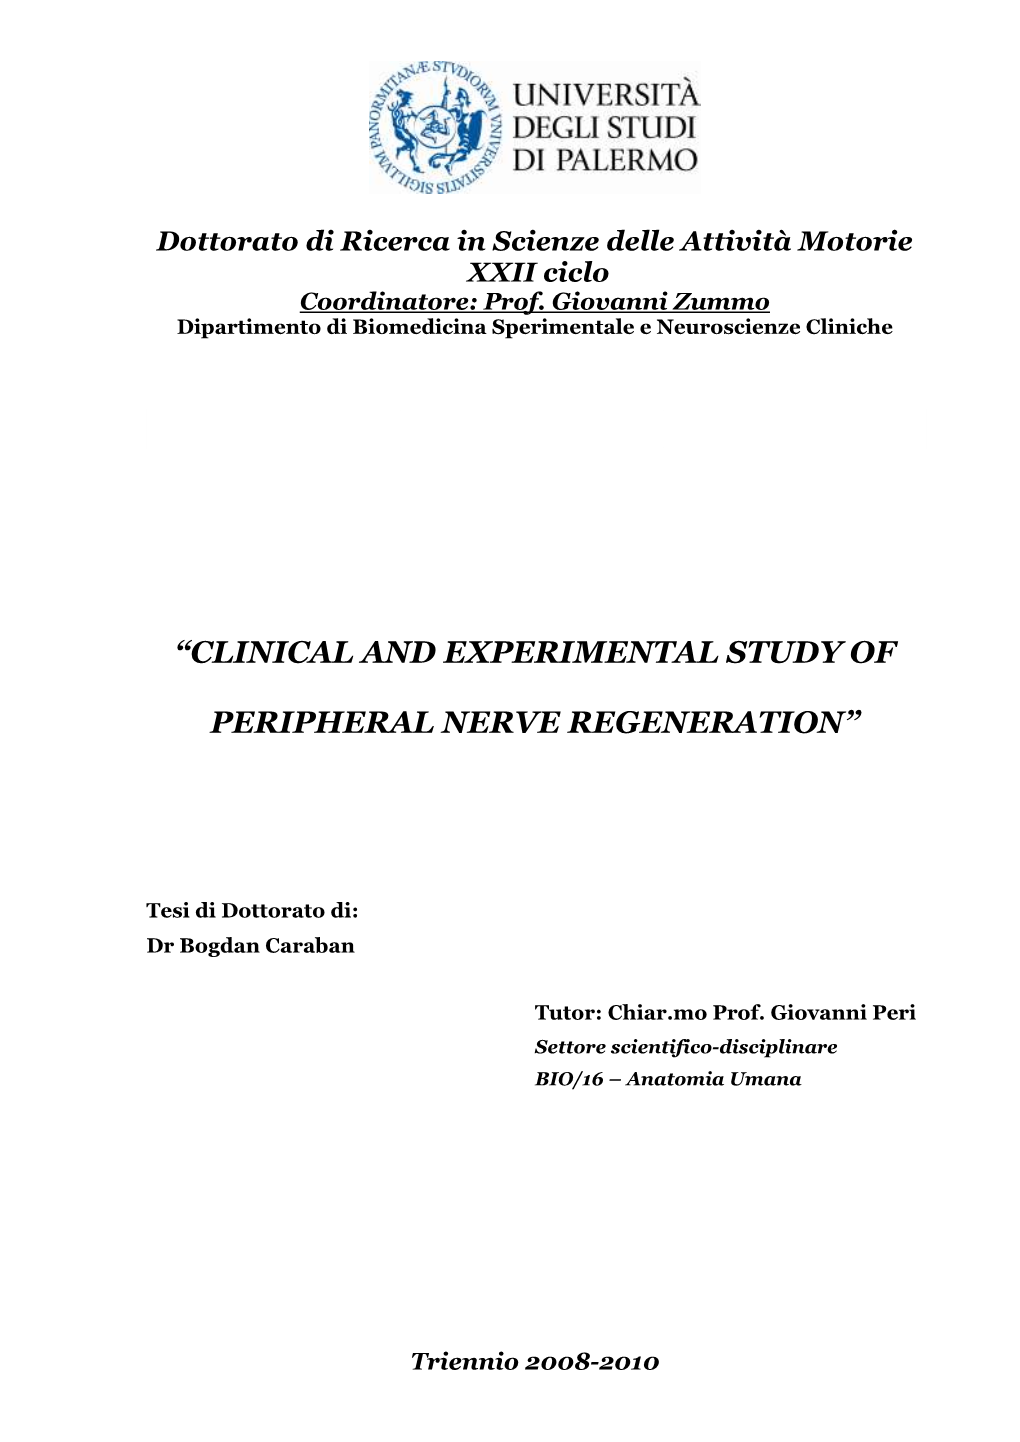 Clinical and Experimental Study of Peripheral Nerve Regeneration